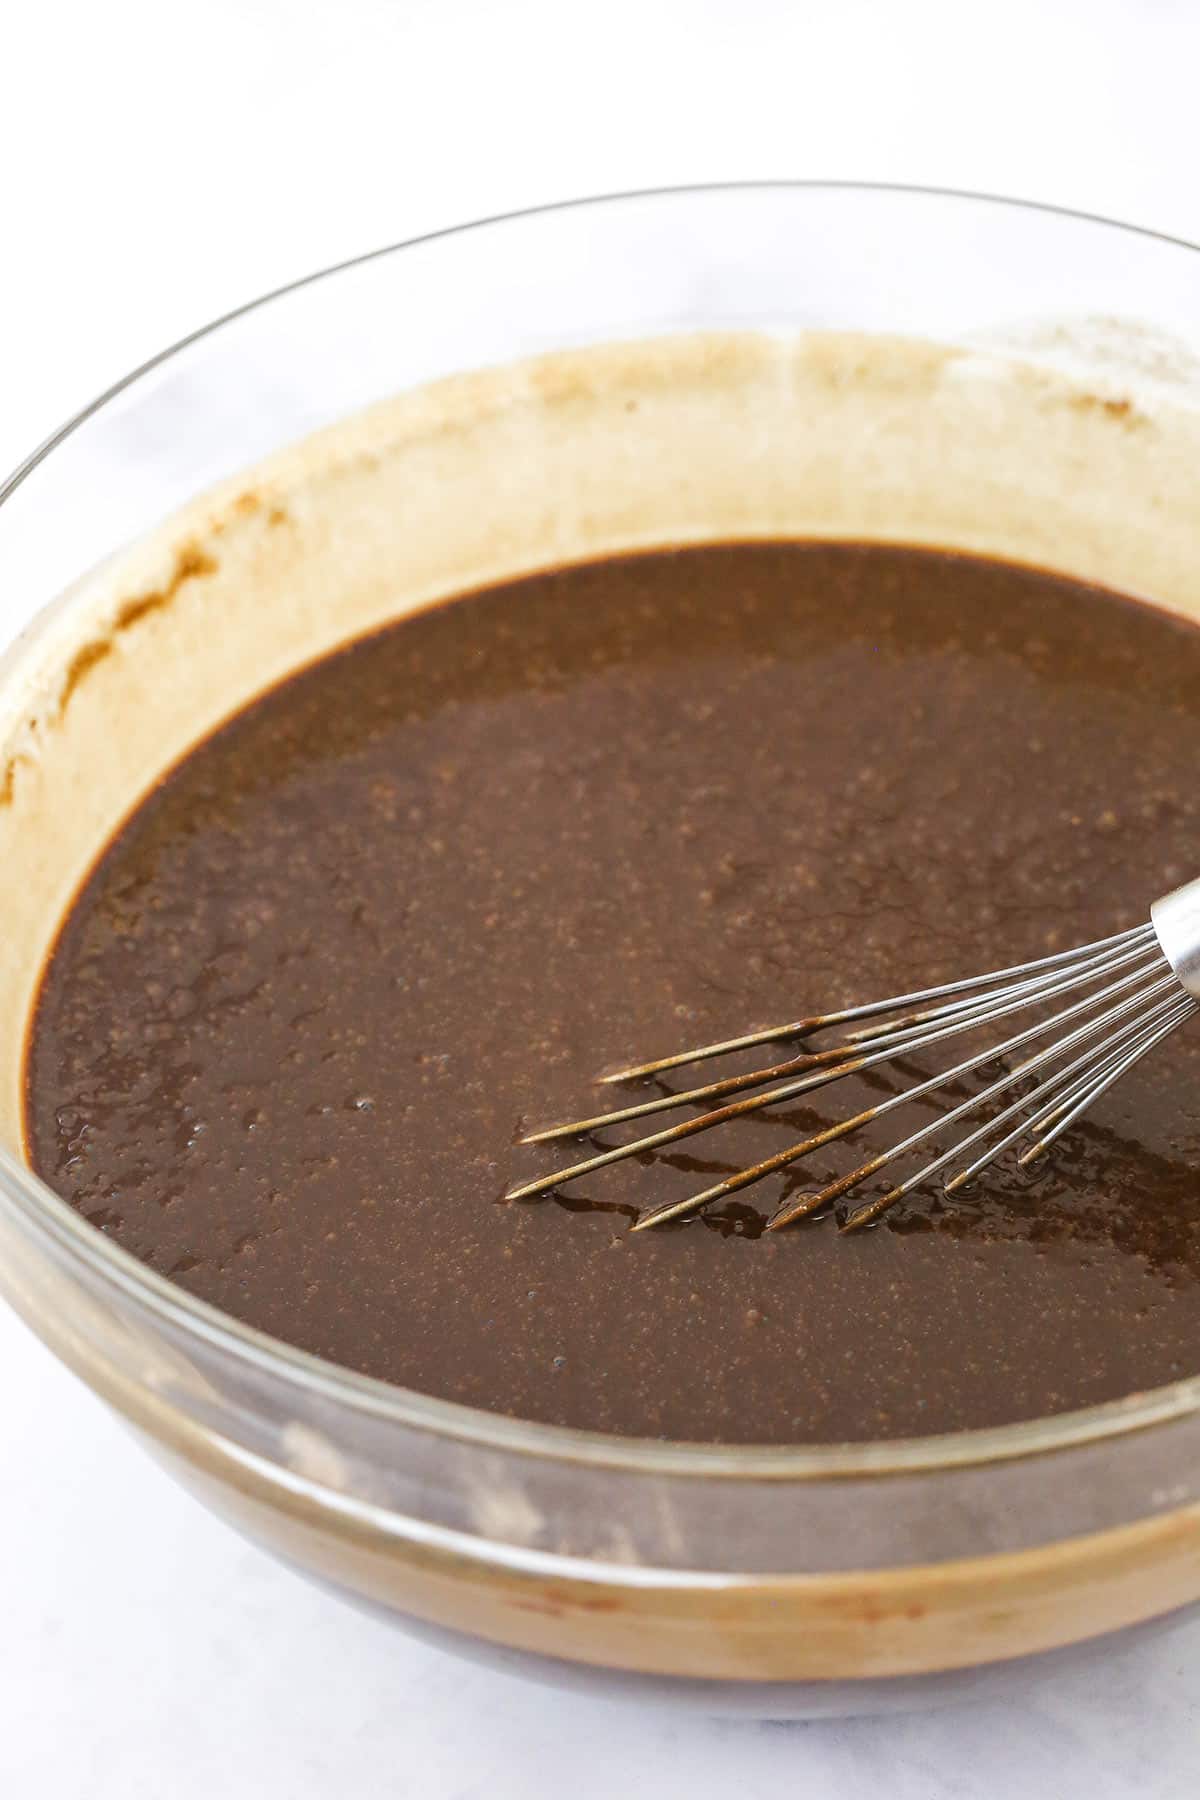 Chocolate cake batter in a glass bowl with a whisk